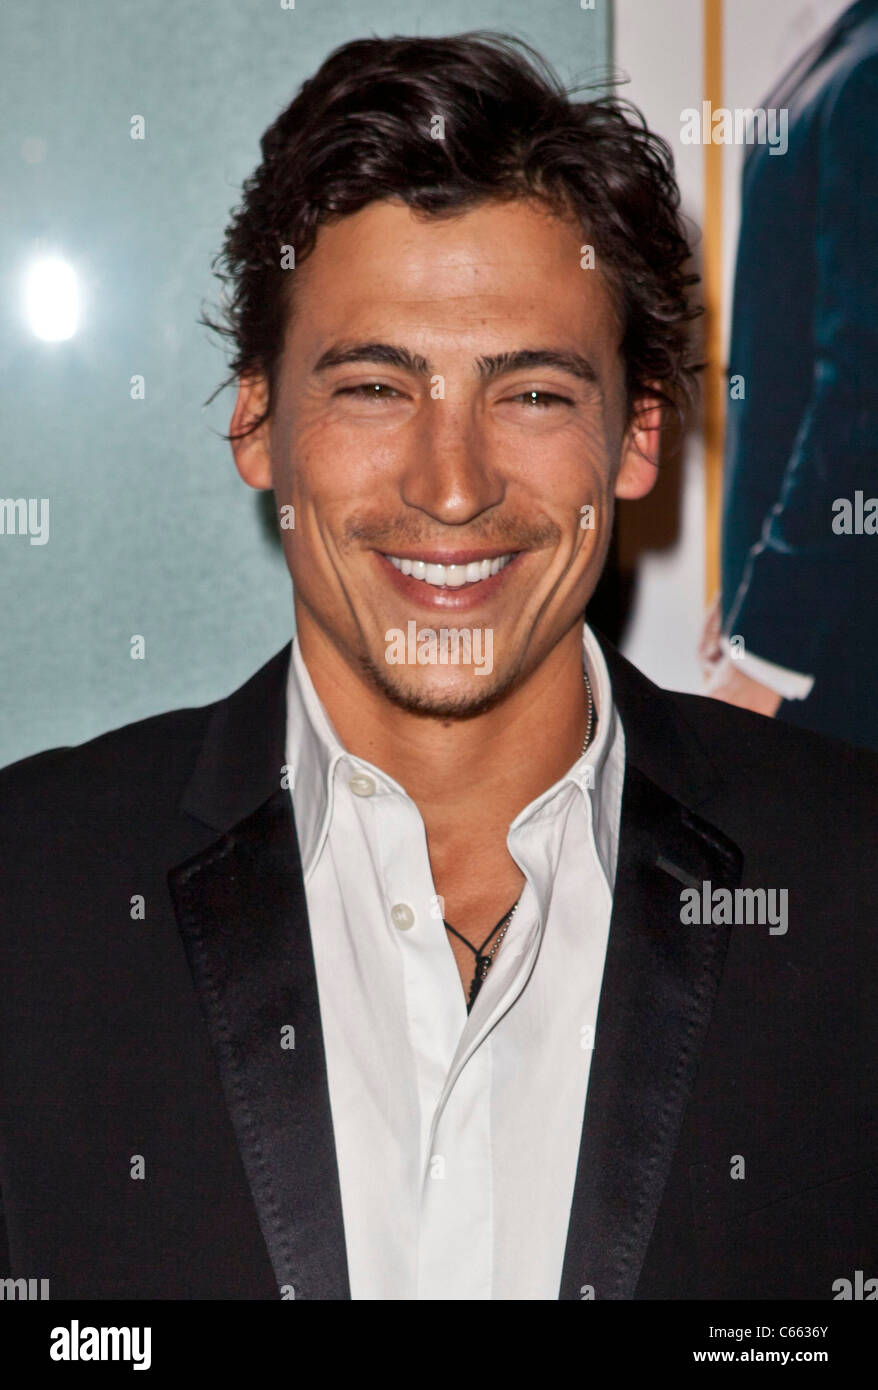 Andrew Keegan at arrivals for LOVE WEDDING MARRIAGE Premiere, Pacific Design Center, Los Angeles, CA May 17, 2011. Photo By: Emiley Schweich/Everett Collection Stock Photo